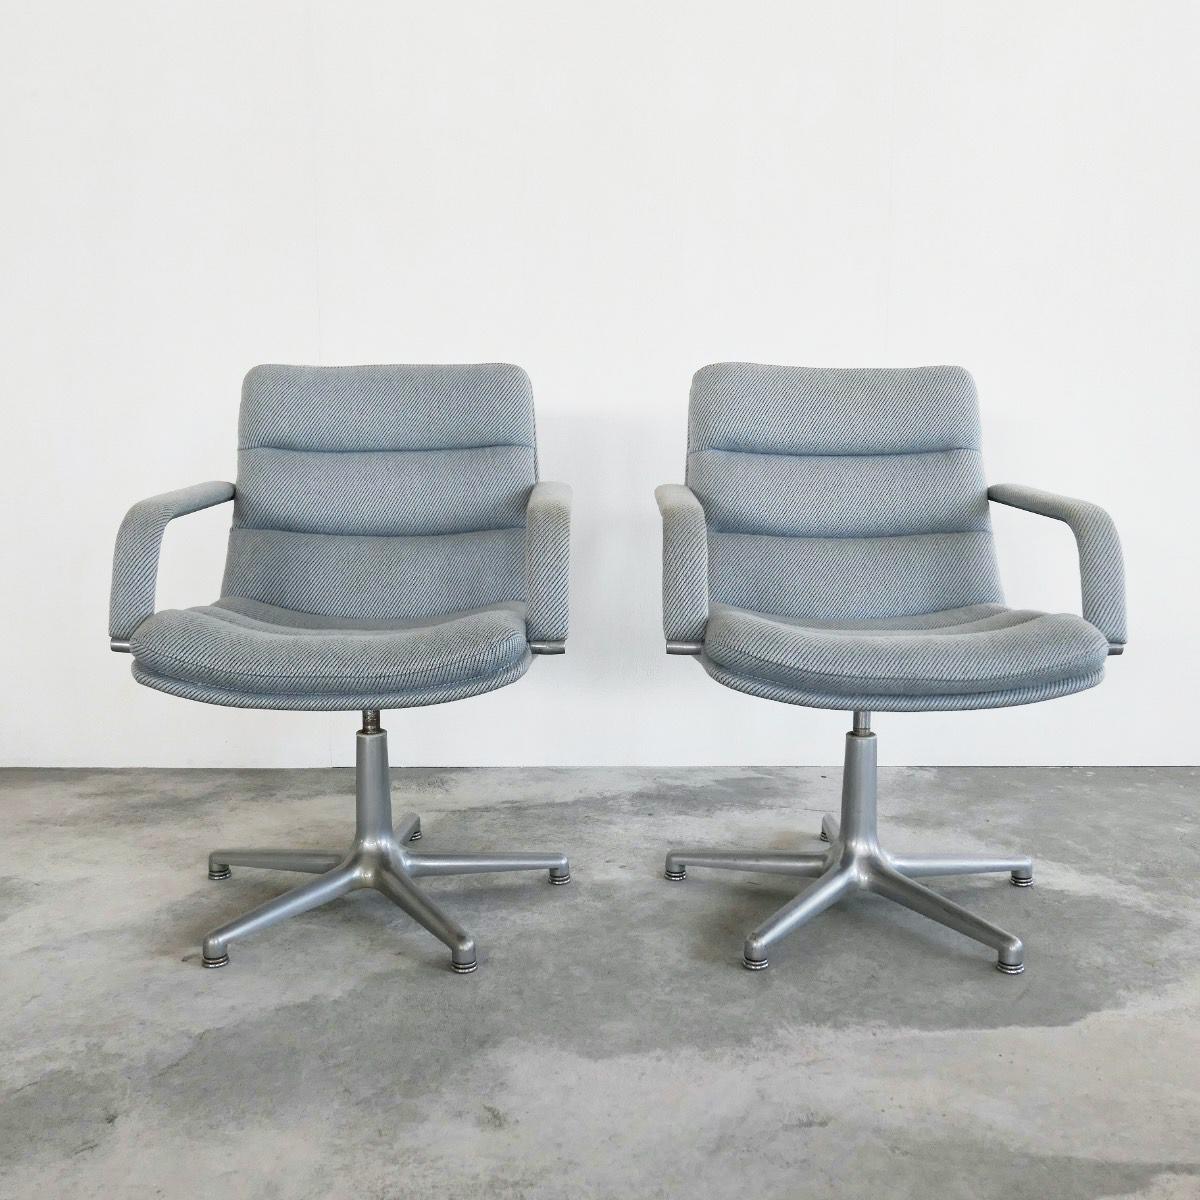 Geoffrey Harcourt pair of Swivel armchairs for Artifort. The Netherlands, 1970s.

Comfortable pair of swivel armchairs by Geoffrey Harcourt for the Dutch company Artifort. Great as a desk chair, but also suitable as side chairs or office chairs,